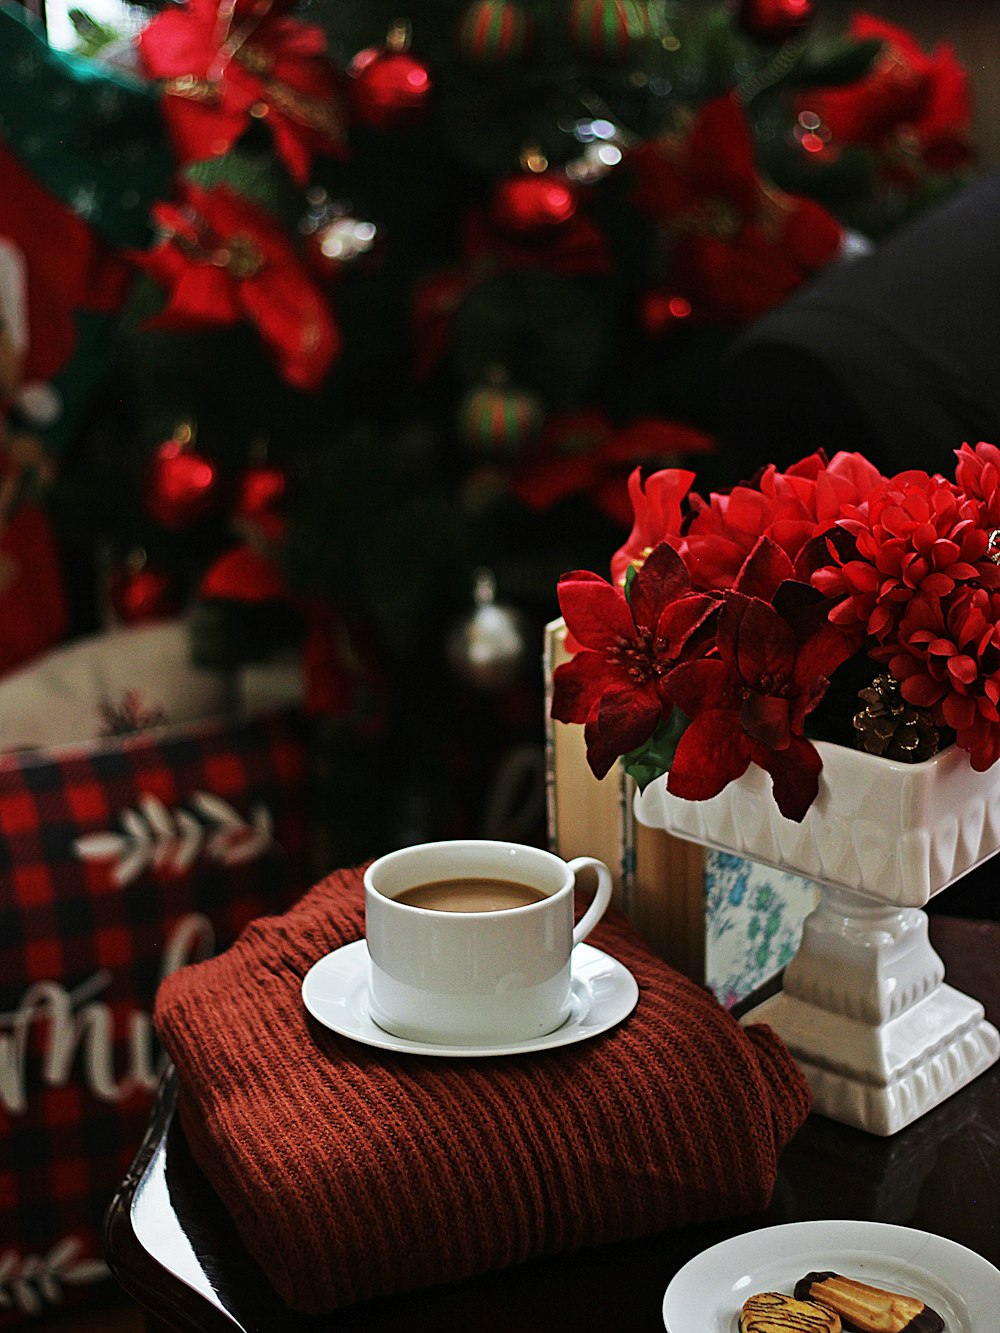 red roses on white ceramic teacup on red and white checkered table cloth